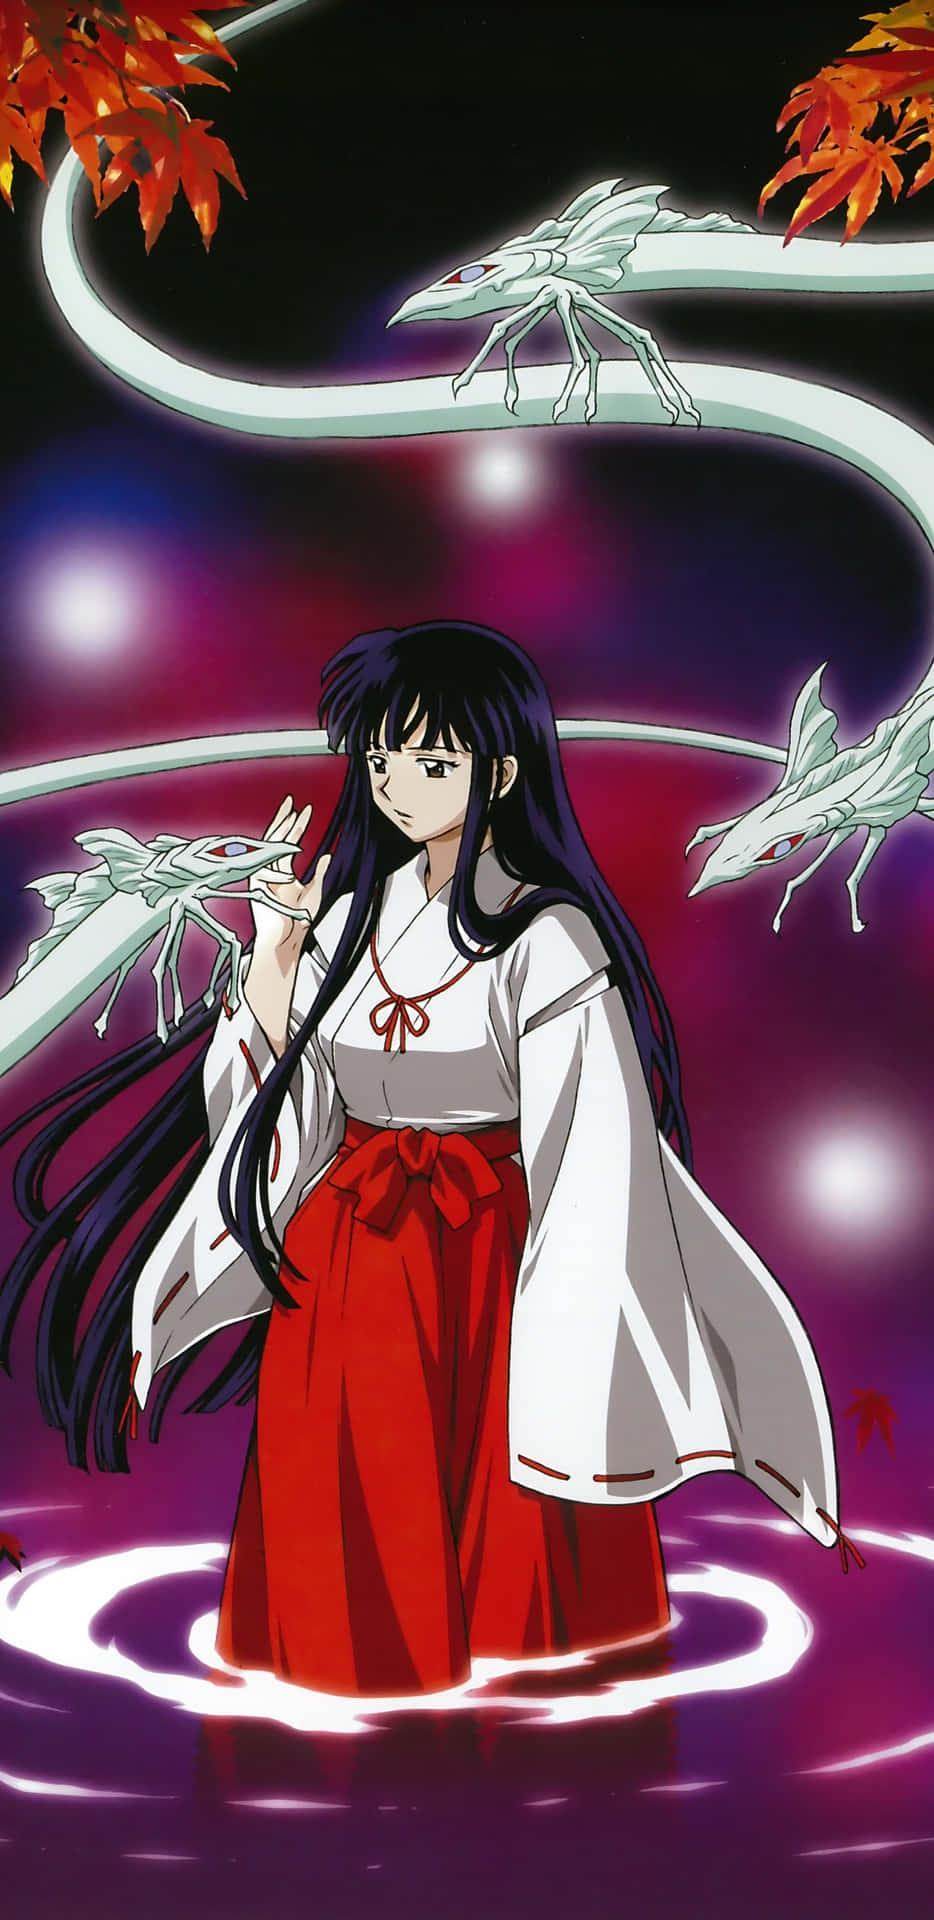 "Experience the Power of the Inuyasha Phone" Wallpaper